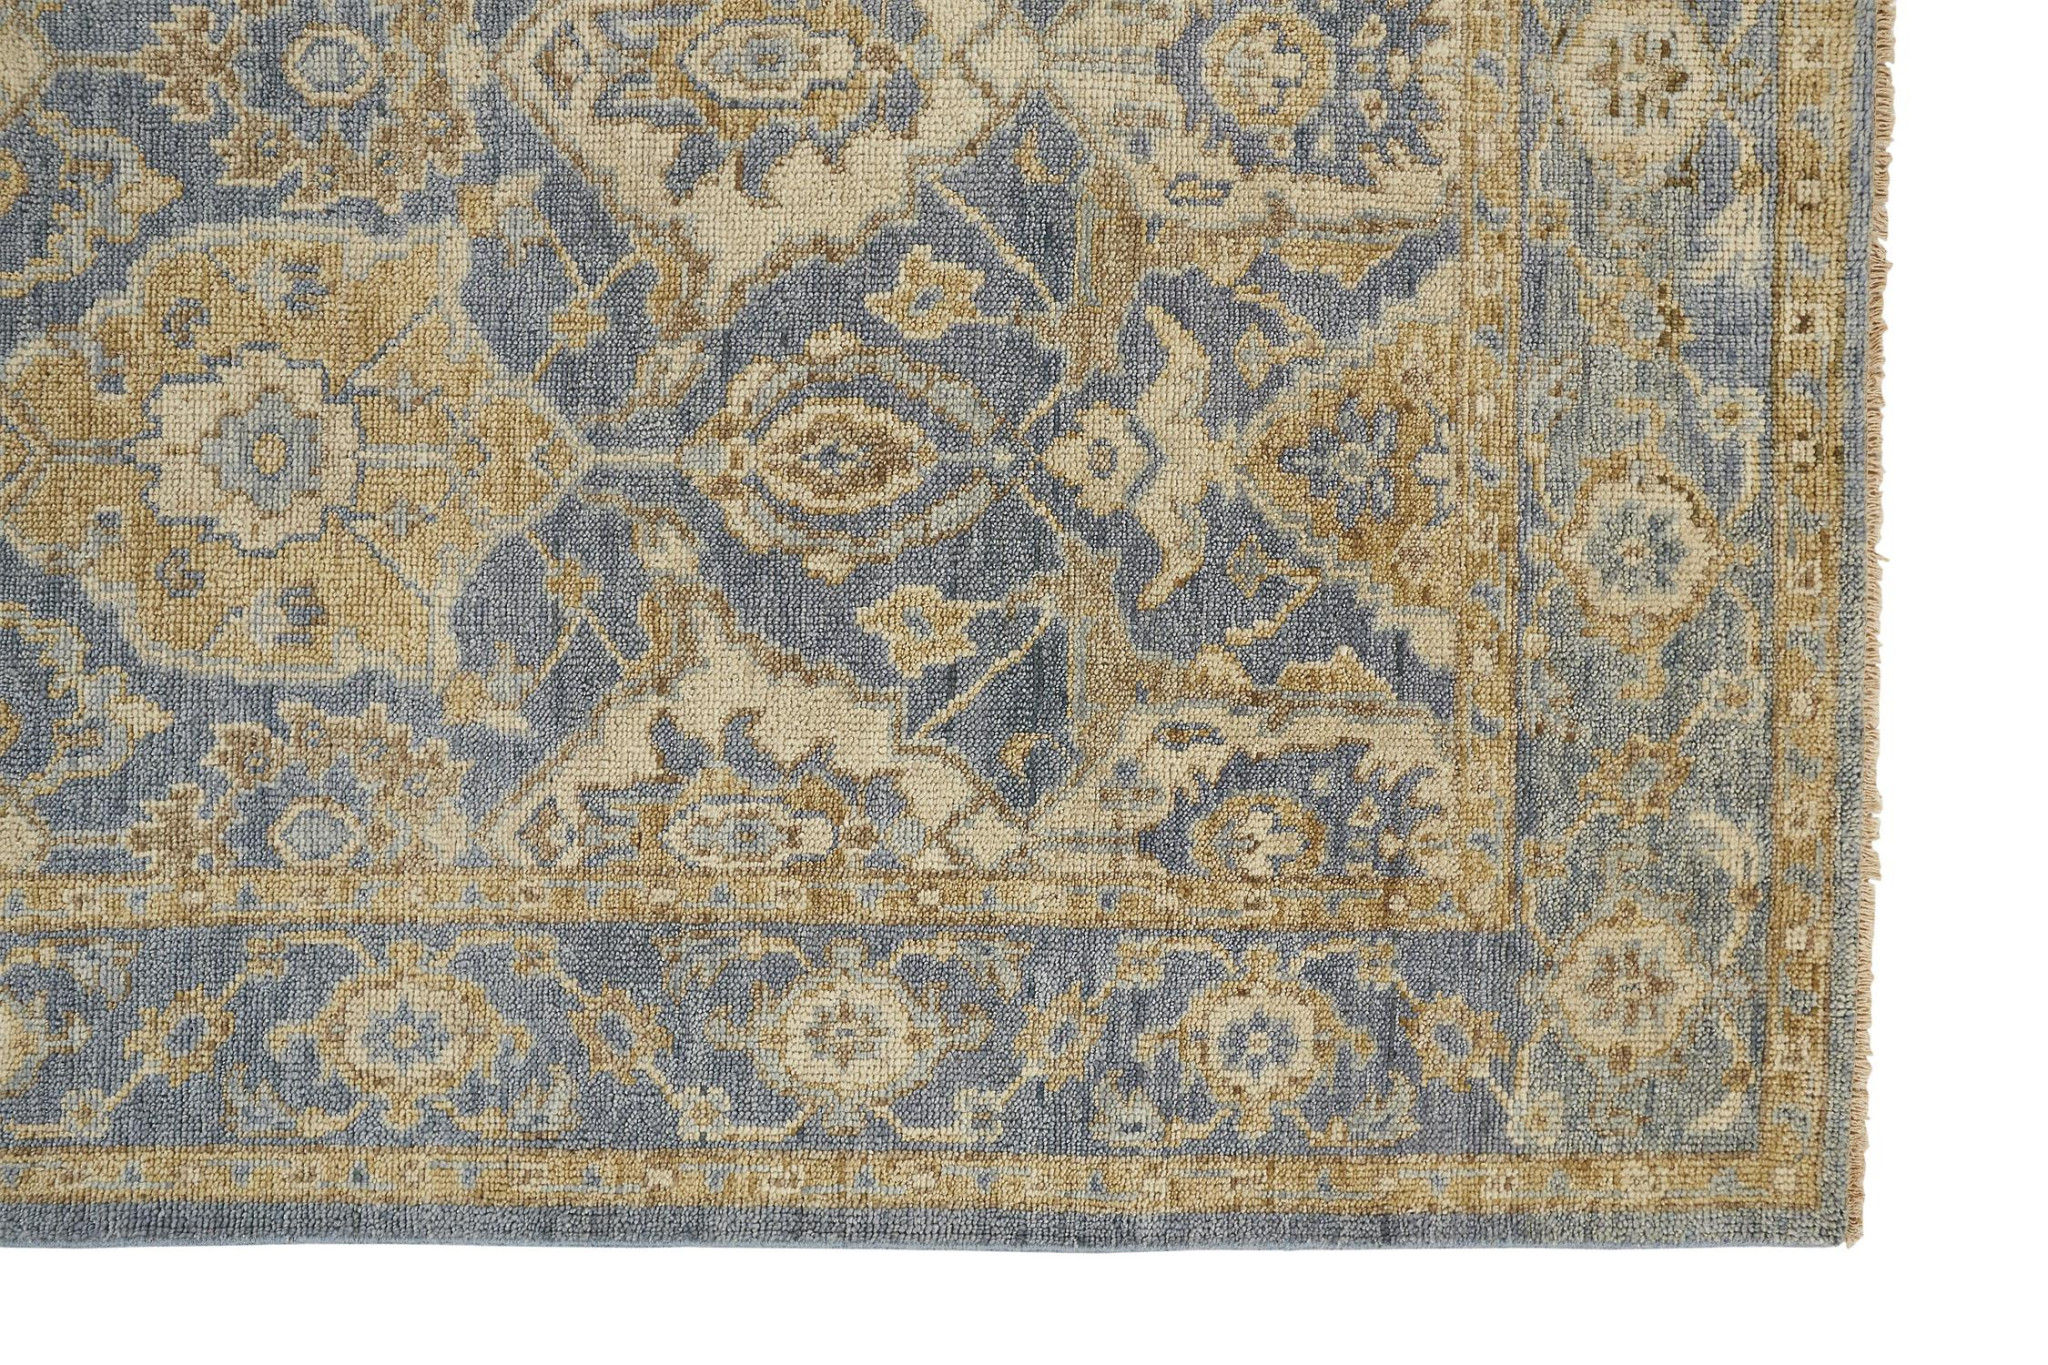 2' X 3' Blue Gold And Tan Wool Floral Hand Knotted Stain Resistant Area Rug With Fringe-512619-1